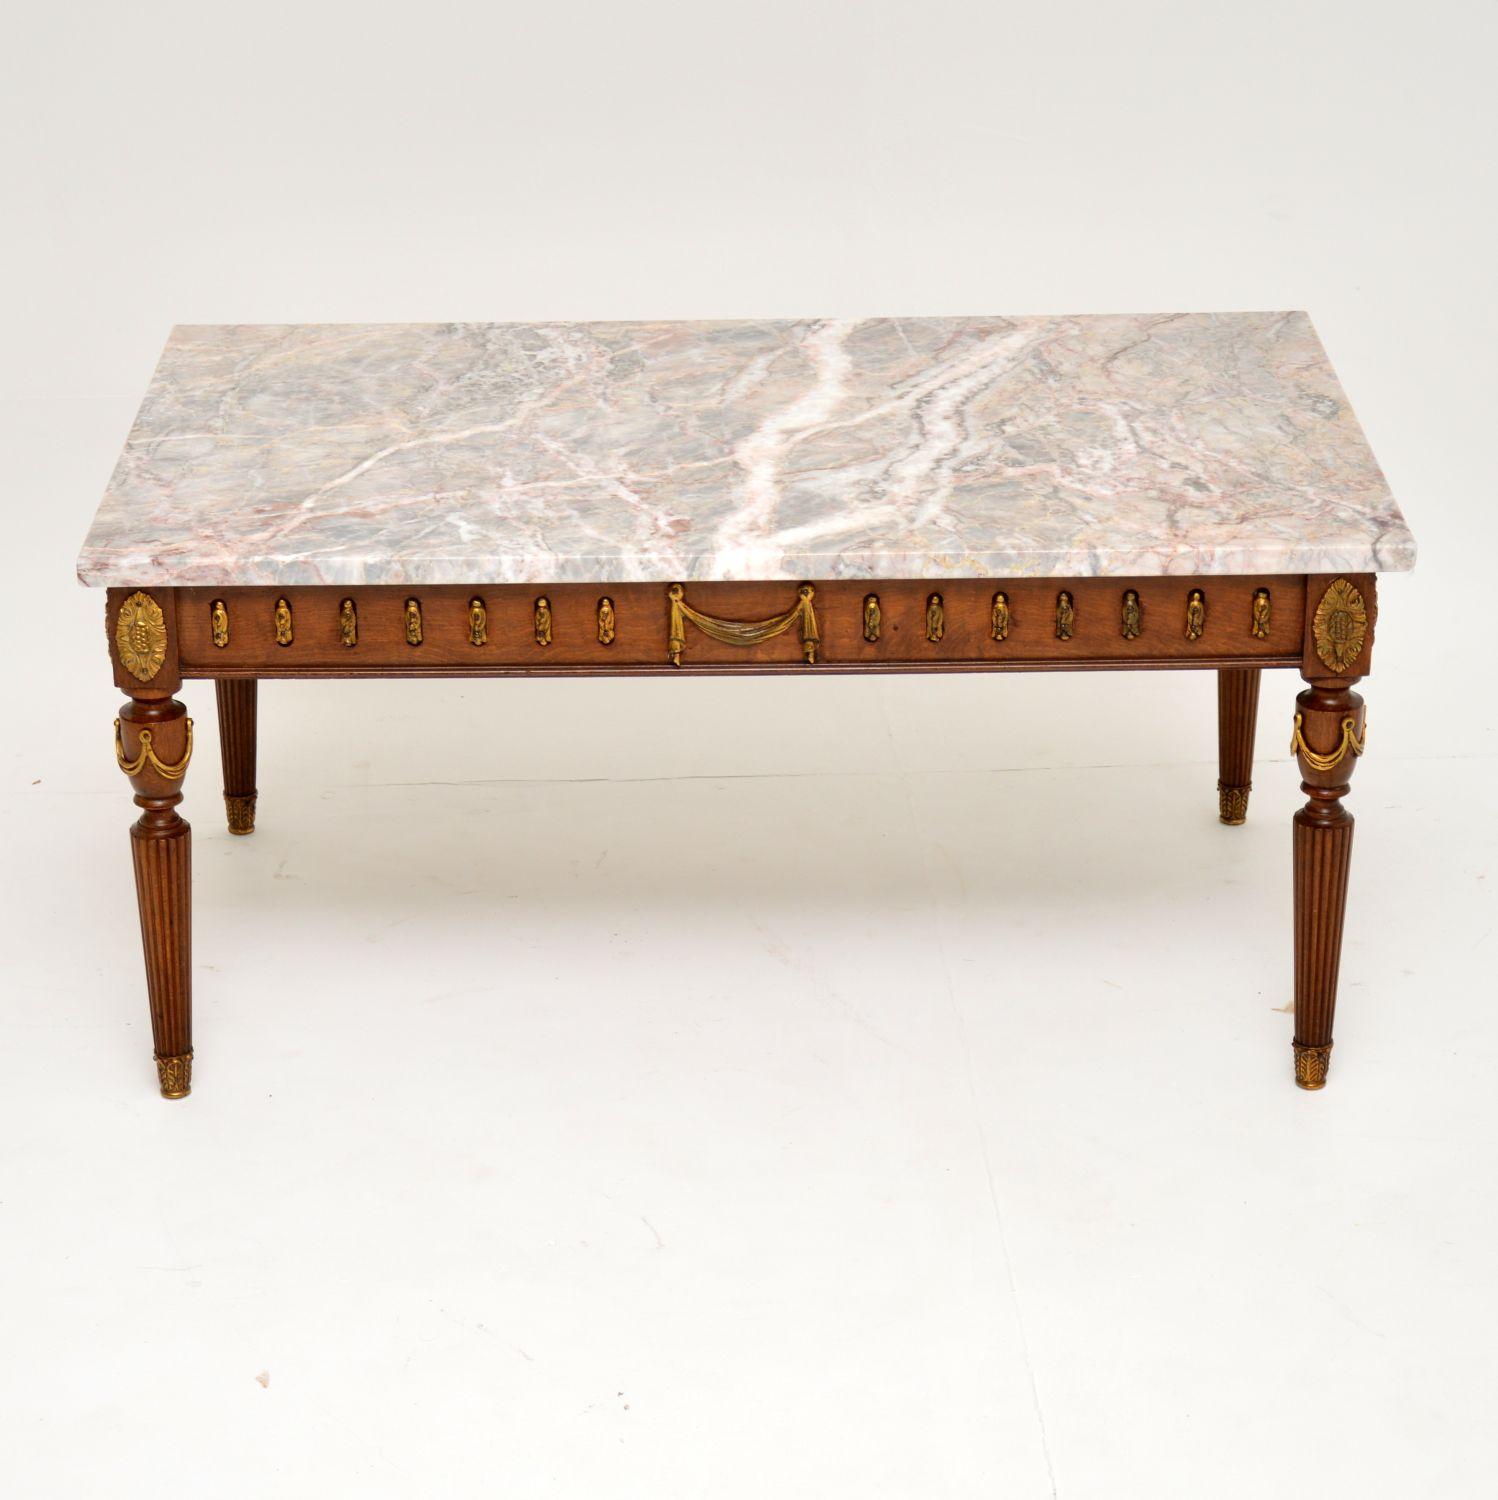 Antique French style marble top mahogany coffee table, in very good condition and dating to circa 1950s period.

The marble top has some beautiful colored veins and just lifts off from the base. The base section has many gilt bronze mounts, swags